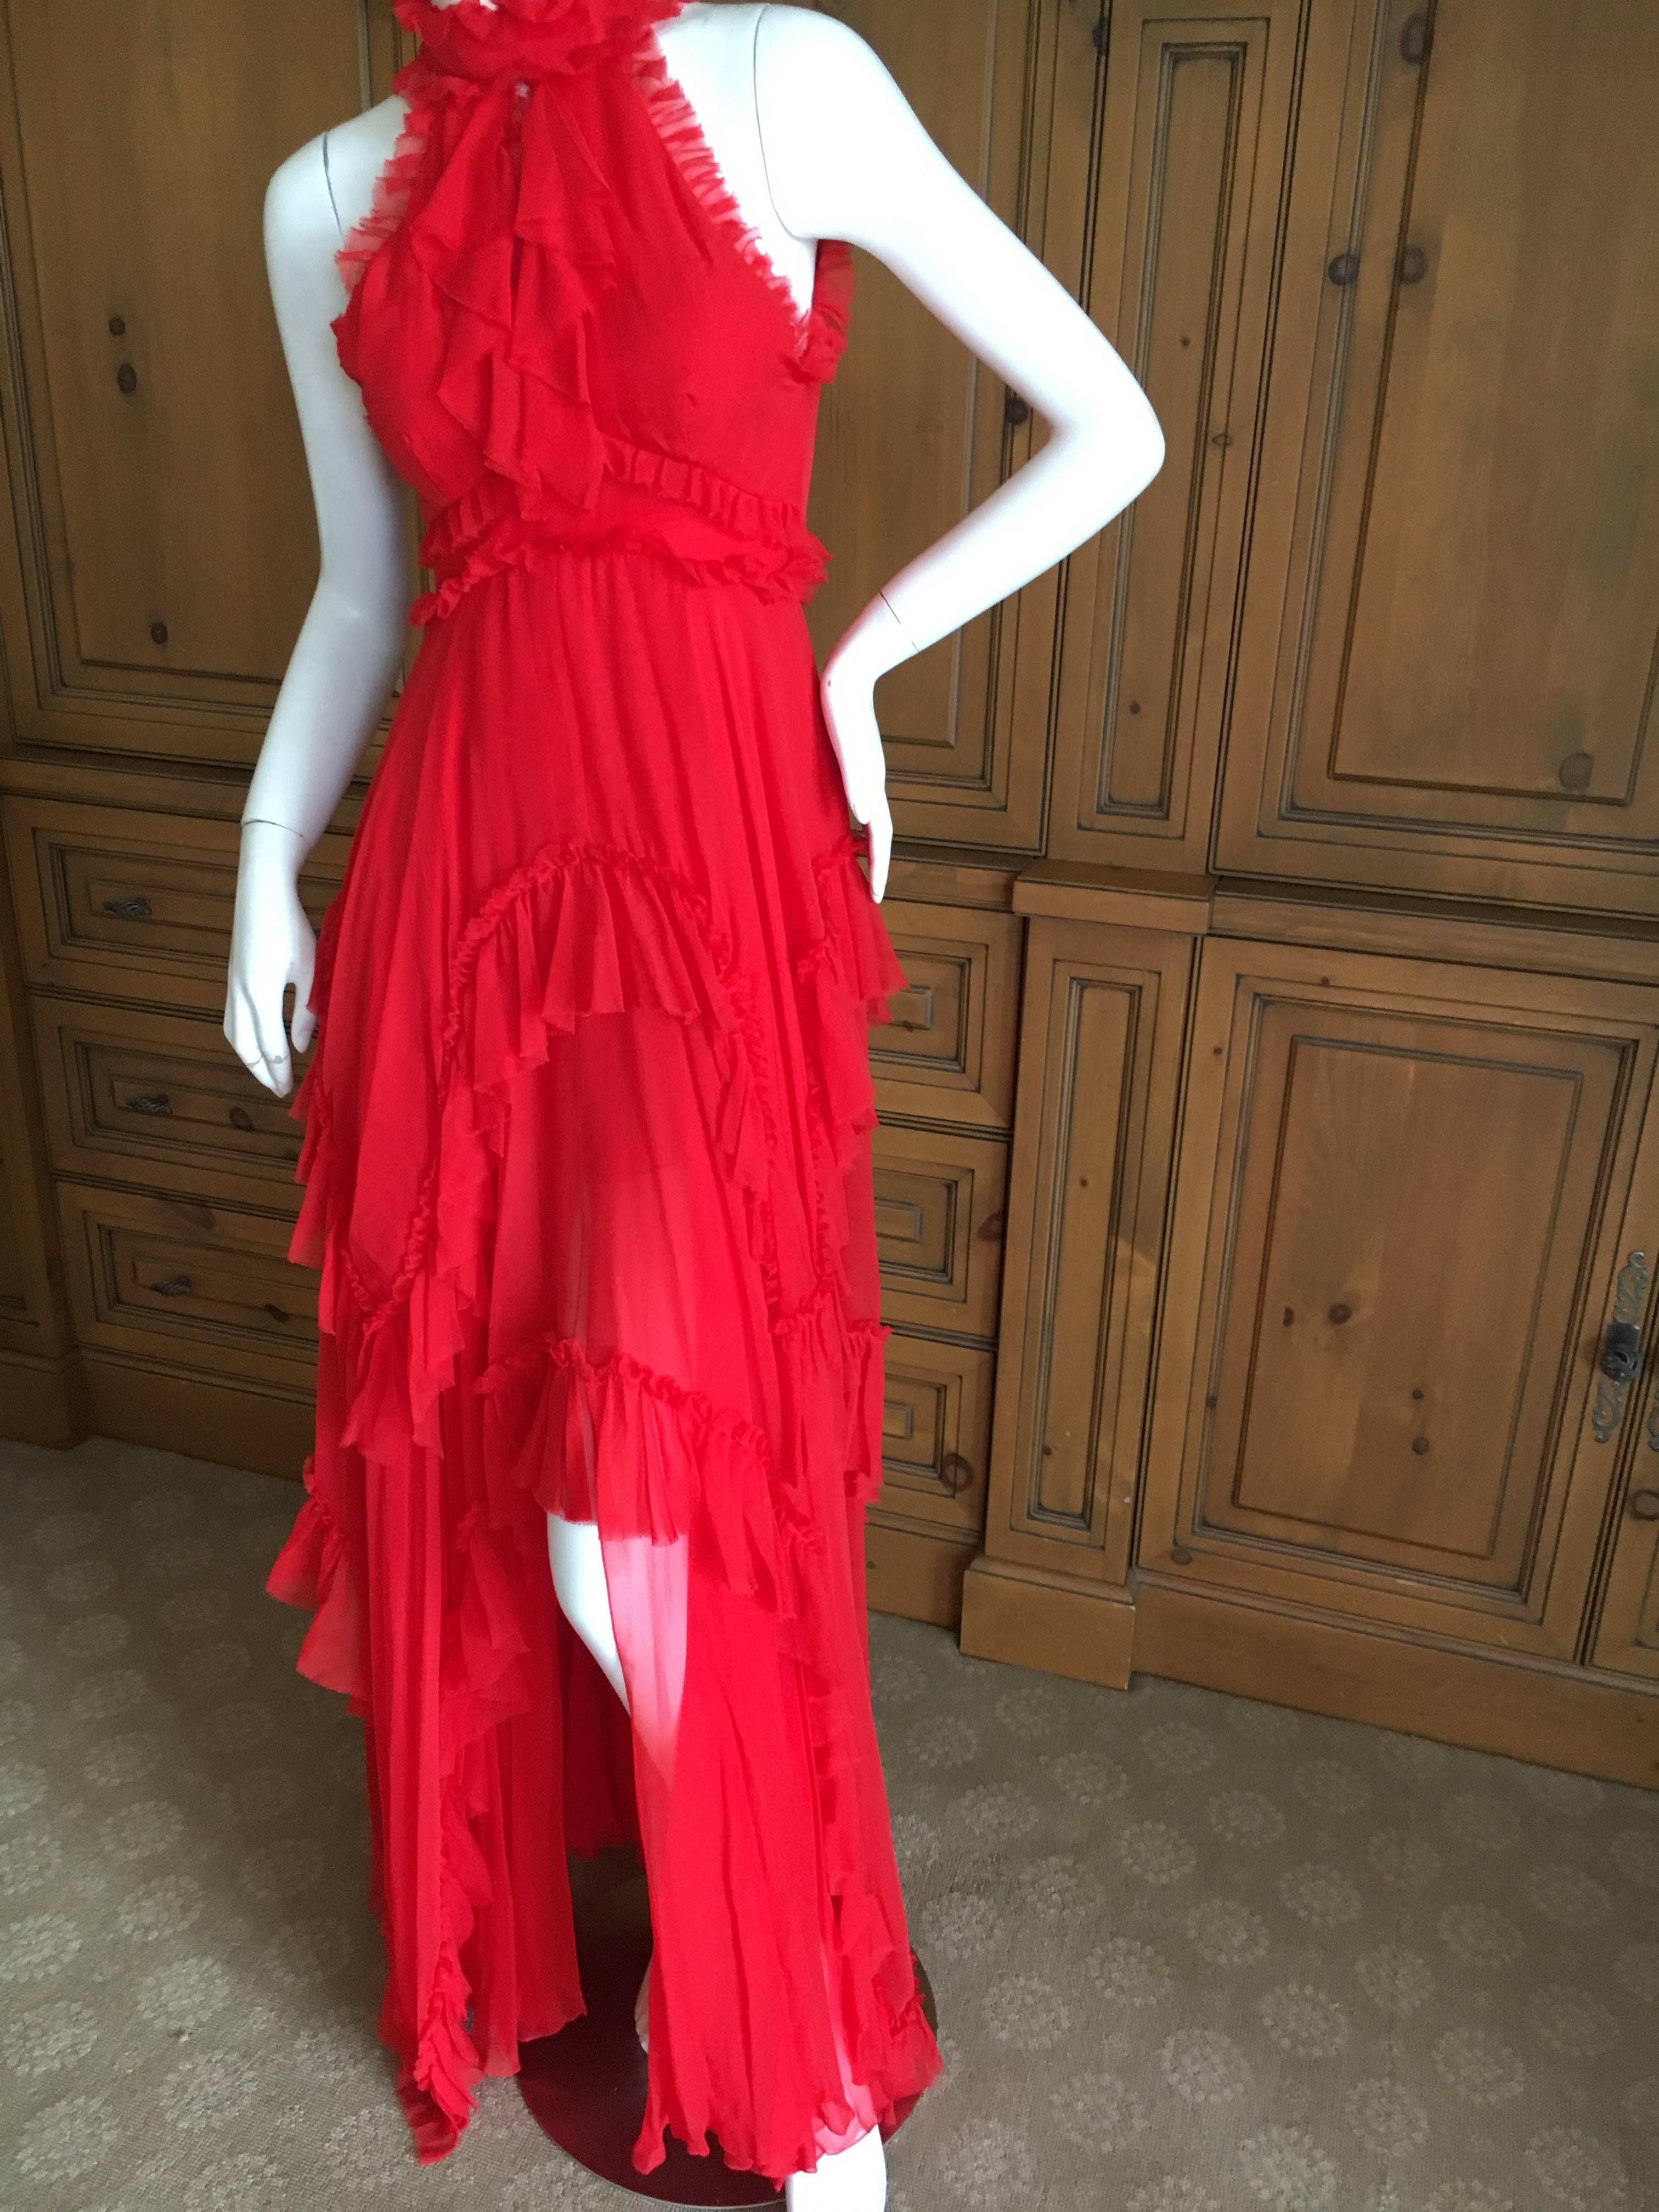 Wonderful red silk halter dress with a high low hem from Emelio Pucci.
Size 34 (4) 
Bust 34"
Waist 26"
Hips 38"
Length 61"
Excellent condition